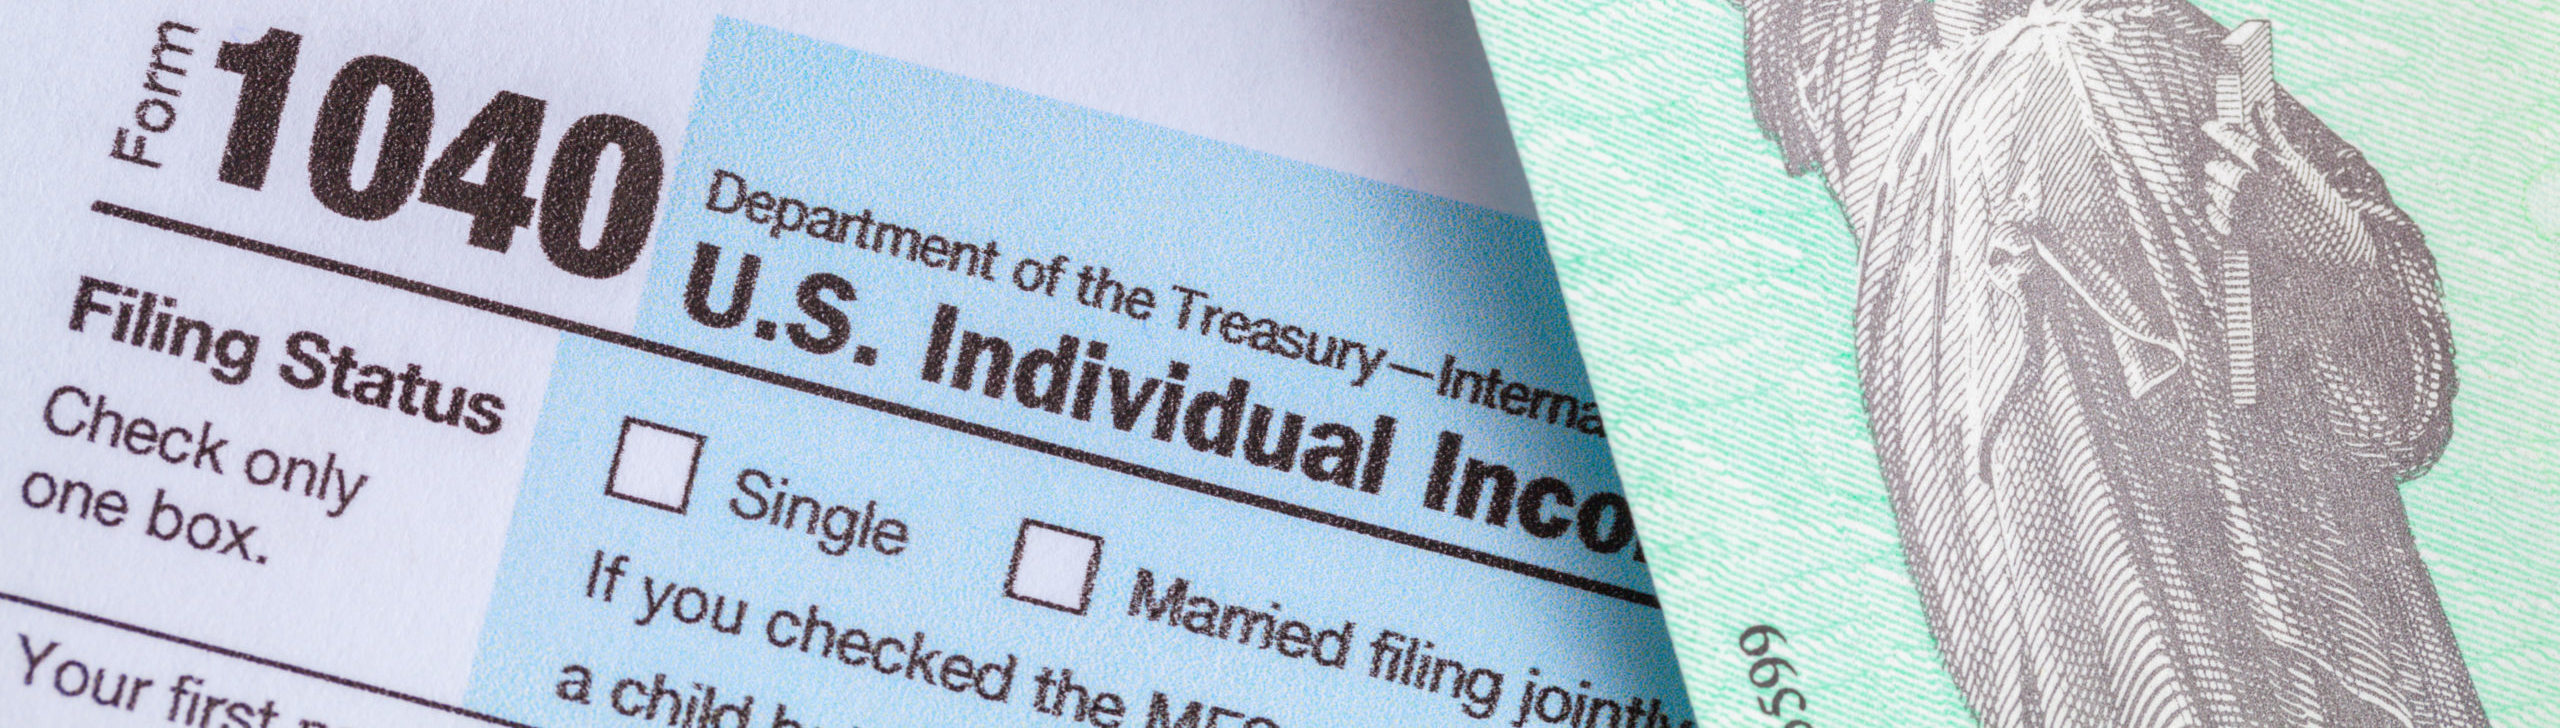 Form 1040 With Tax Check and Money